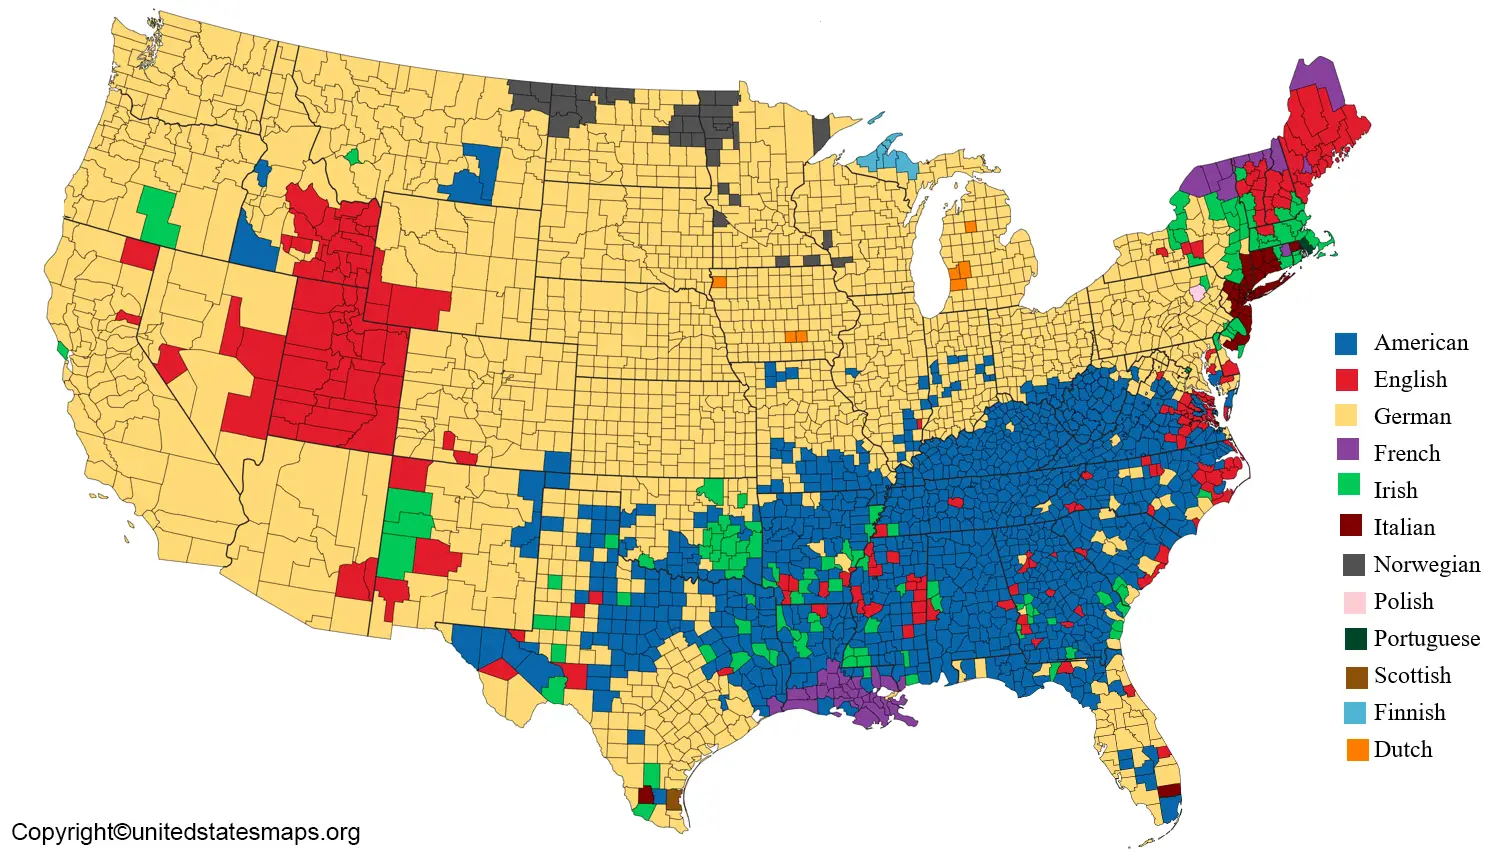 US Ancestry Map United States Ancestry Map [USA]